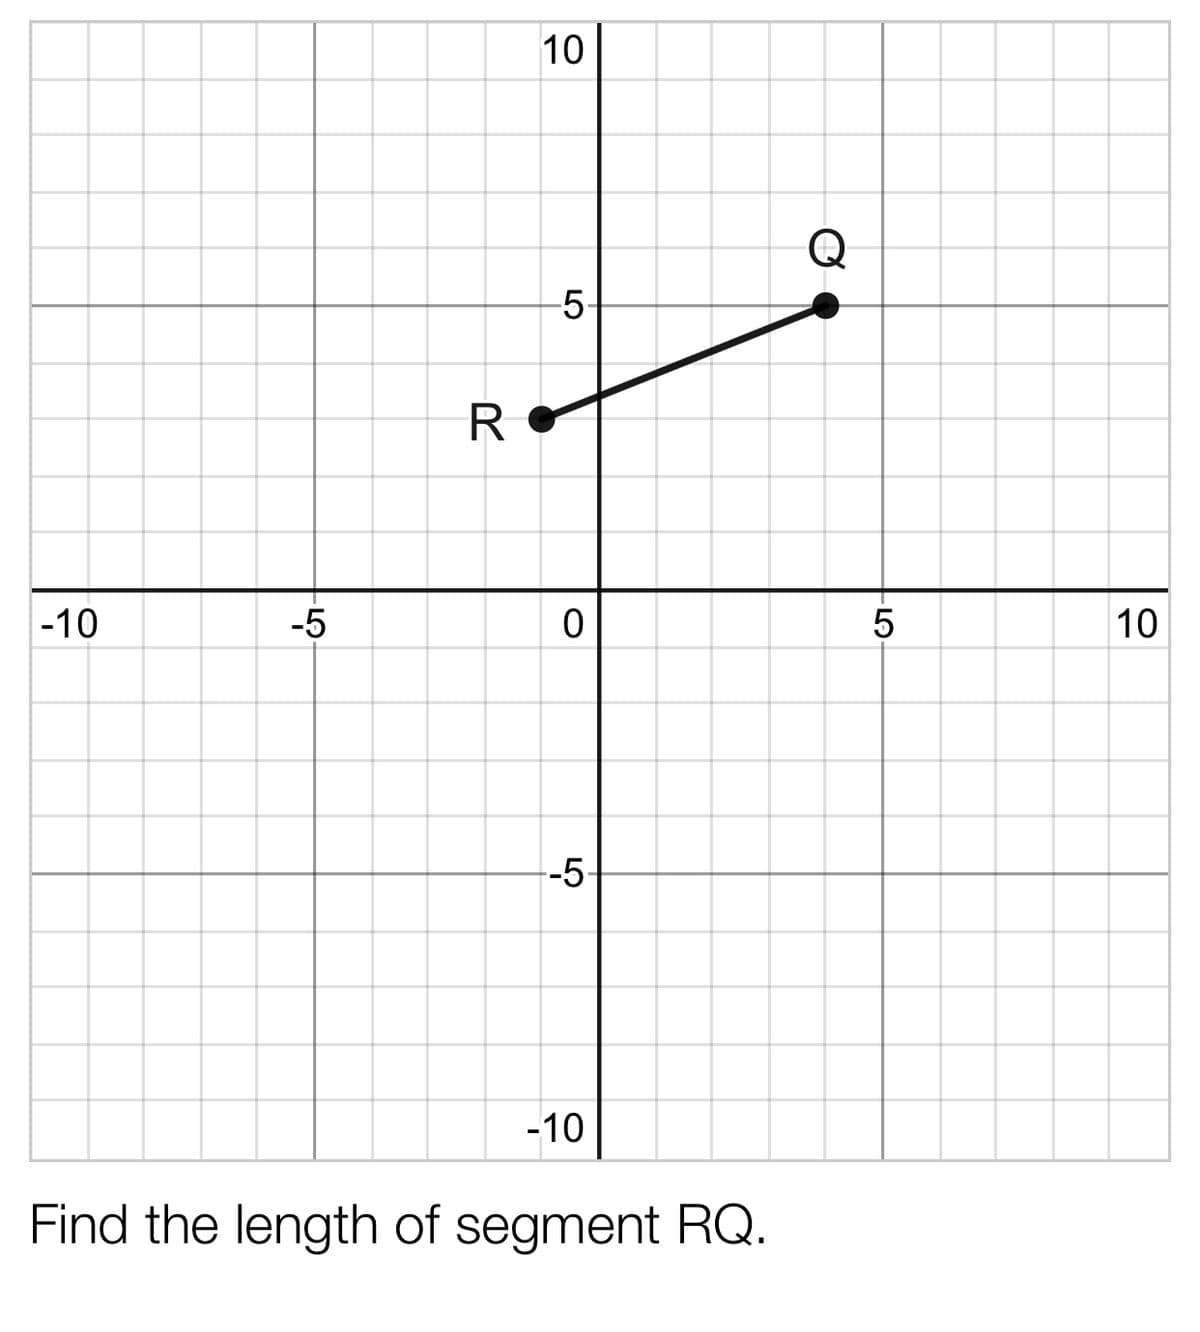 10
-5-
R
-10
-5
10
-5
-10
Find the length of segment RQ.
